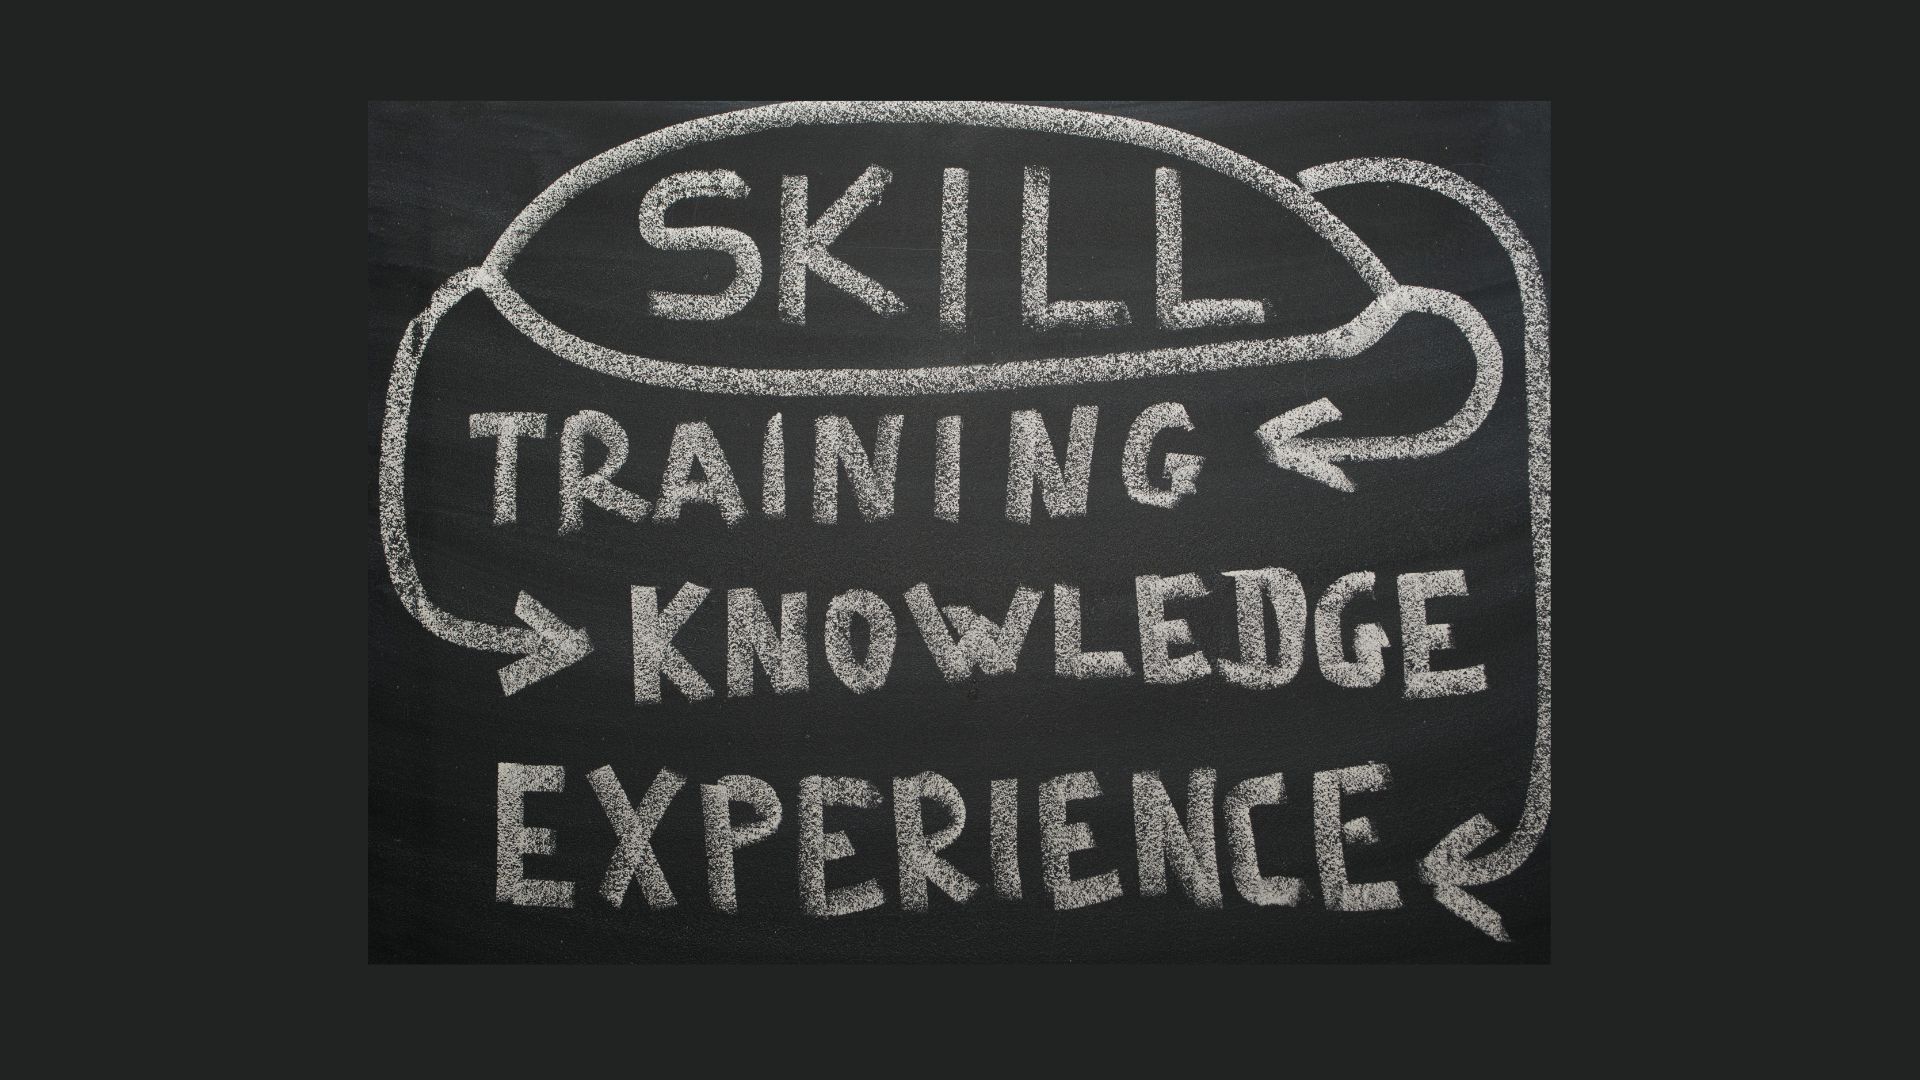 skills = training and experience